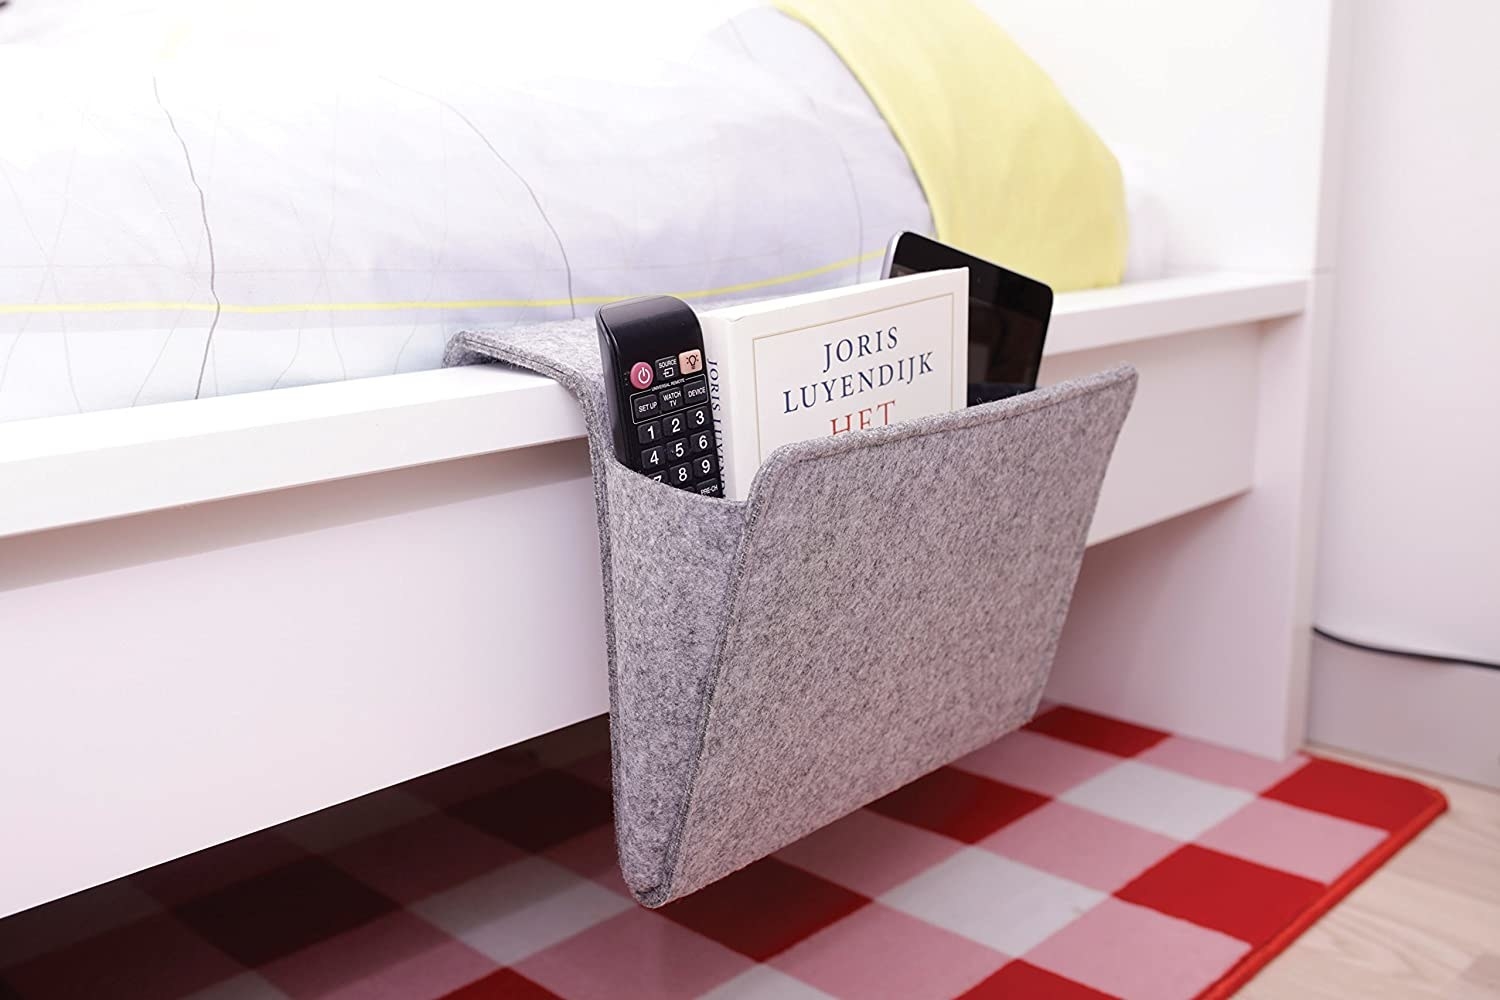 The bedside caddy positioned on the side of the bed